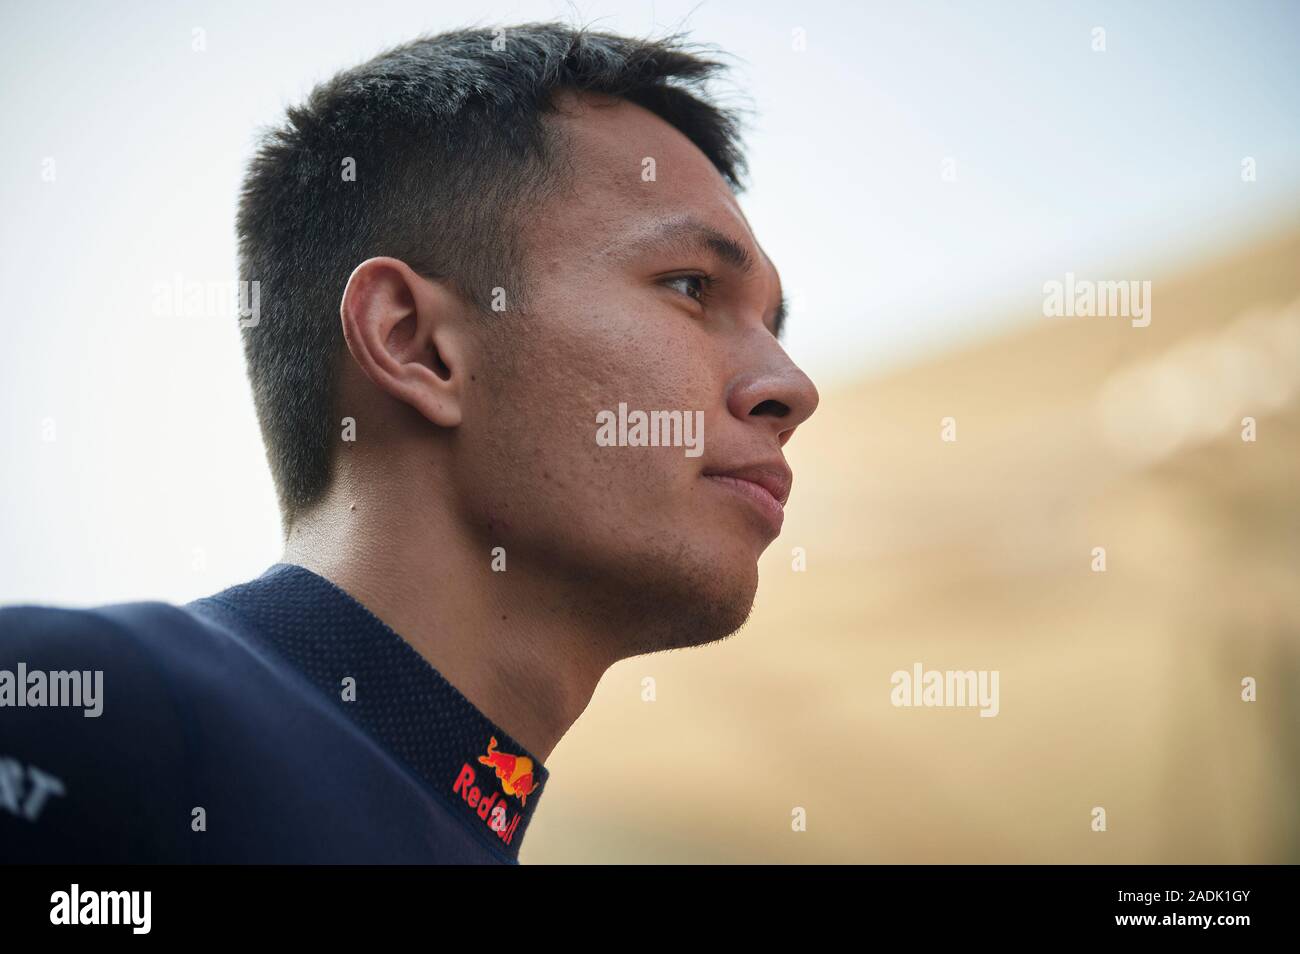 Red Bull Racing’s Thai driver Alexander Albon arrives for the drivers parade ahead of the Abu Dhabi F1 Grand Prix race at the Yas Marina Circuit in Abu Dhabi. Stock Photo